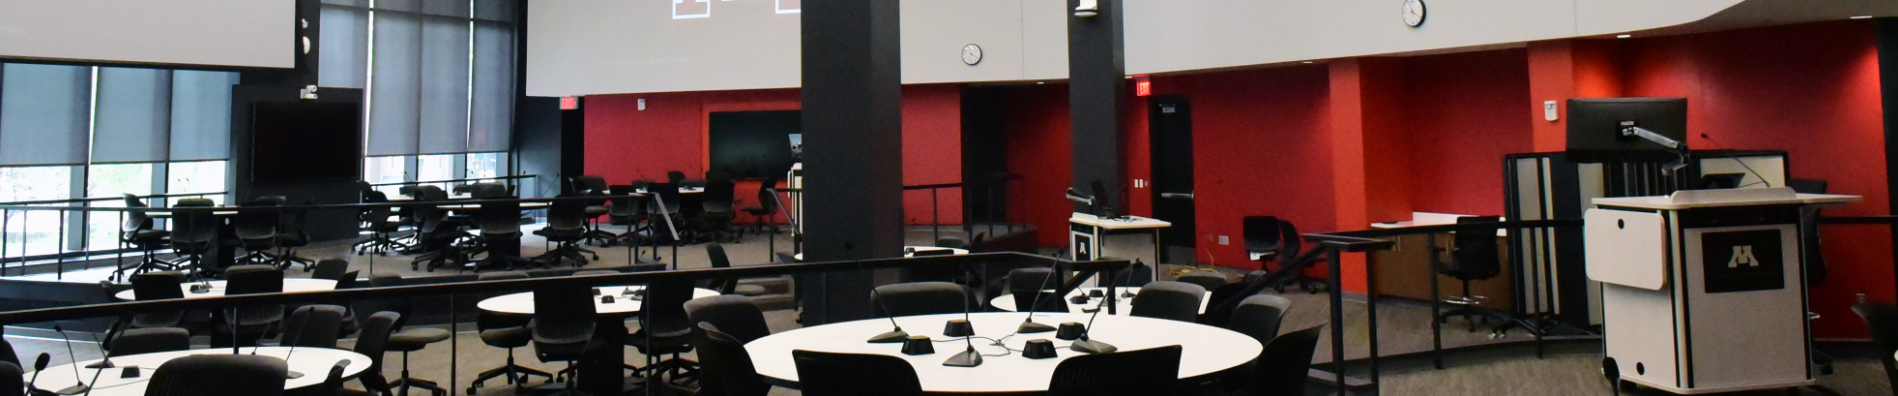 Photograph of the health science classroom at the University of Minnesota, with multiple white round tables, black chairs, and integrated screens, microphones and technology